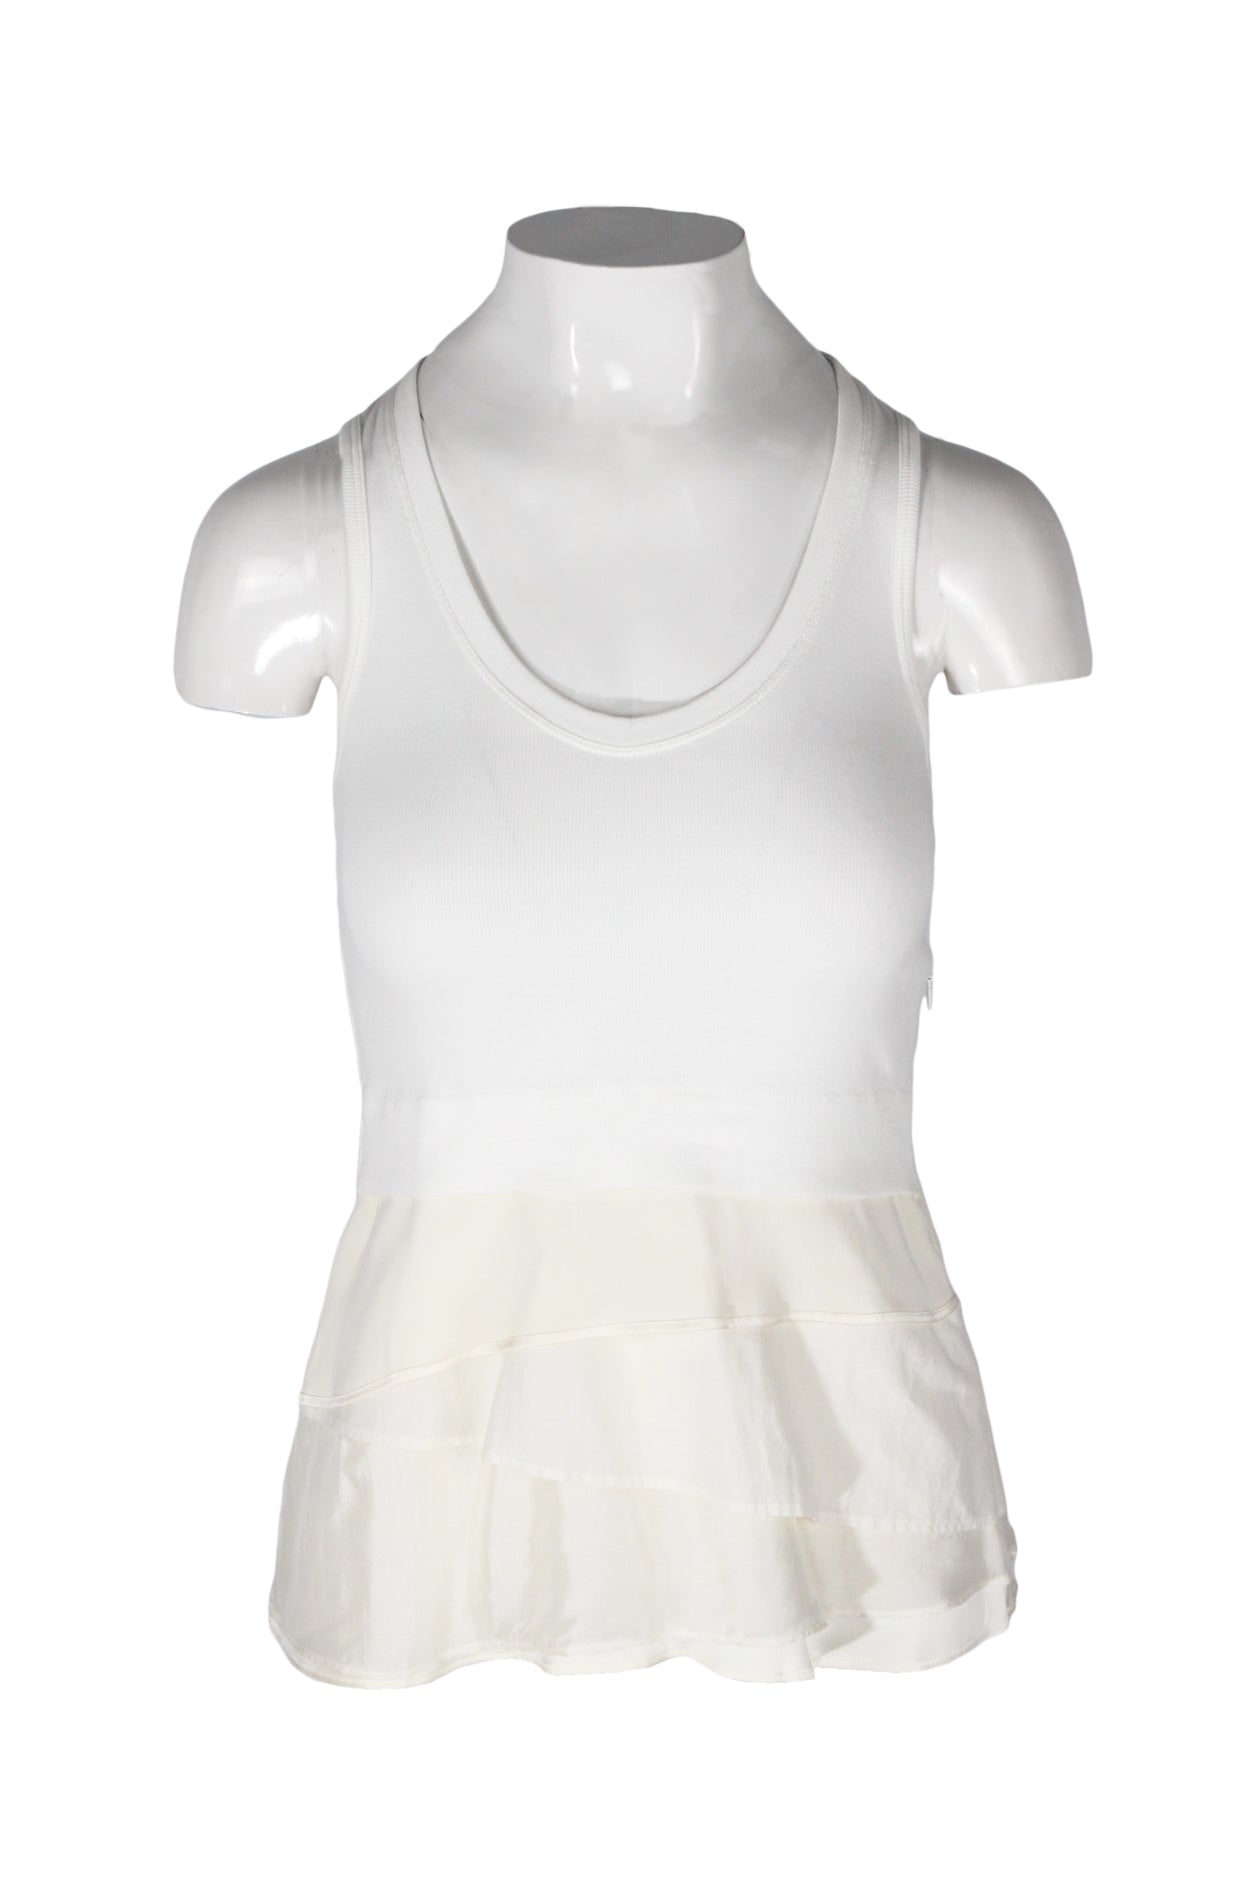 front angle brunello cucinelli white rib knit tank on feminine mannequin torso featuring oval neckline, cream/ivory tiered silk blend panels at lower, and invisible side zip closure.